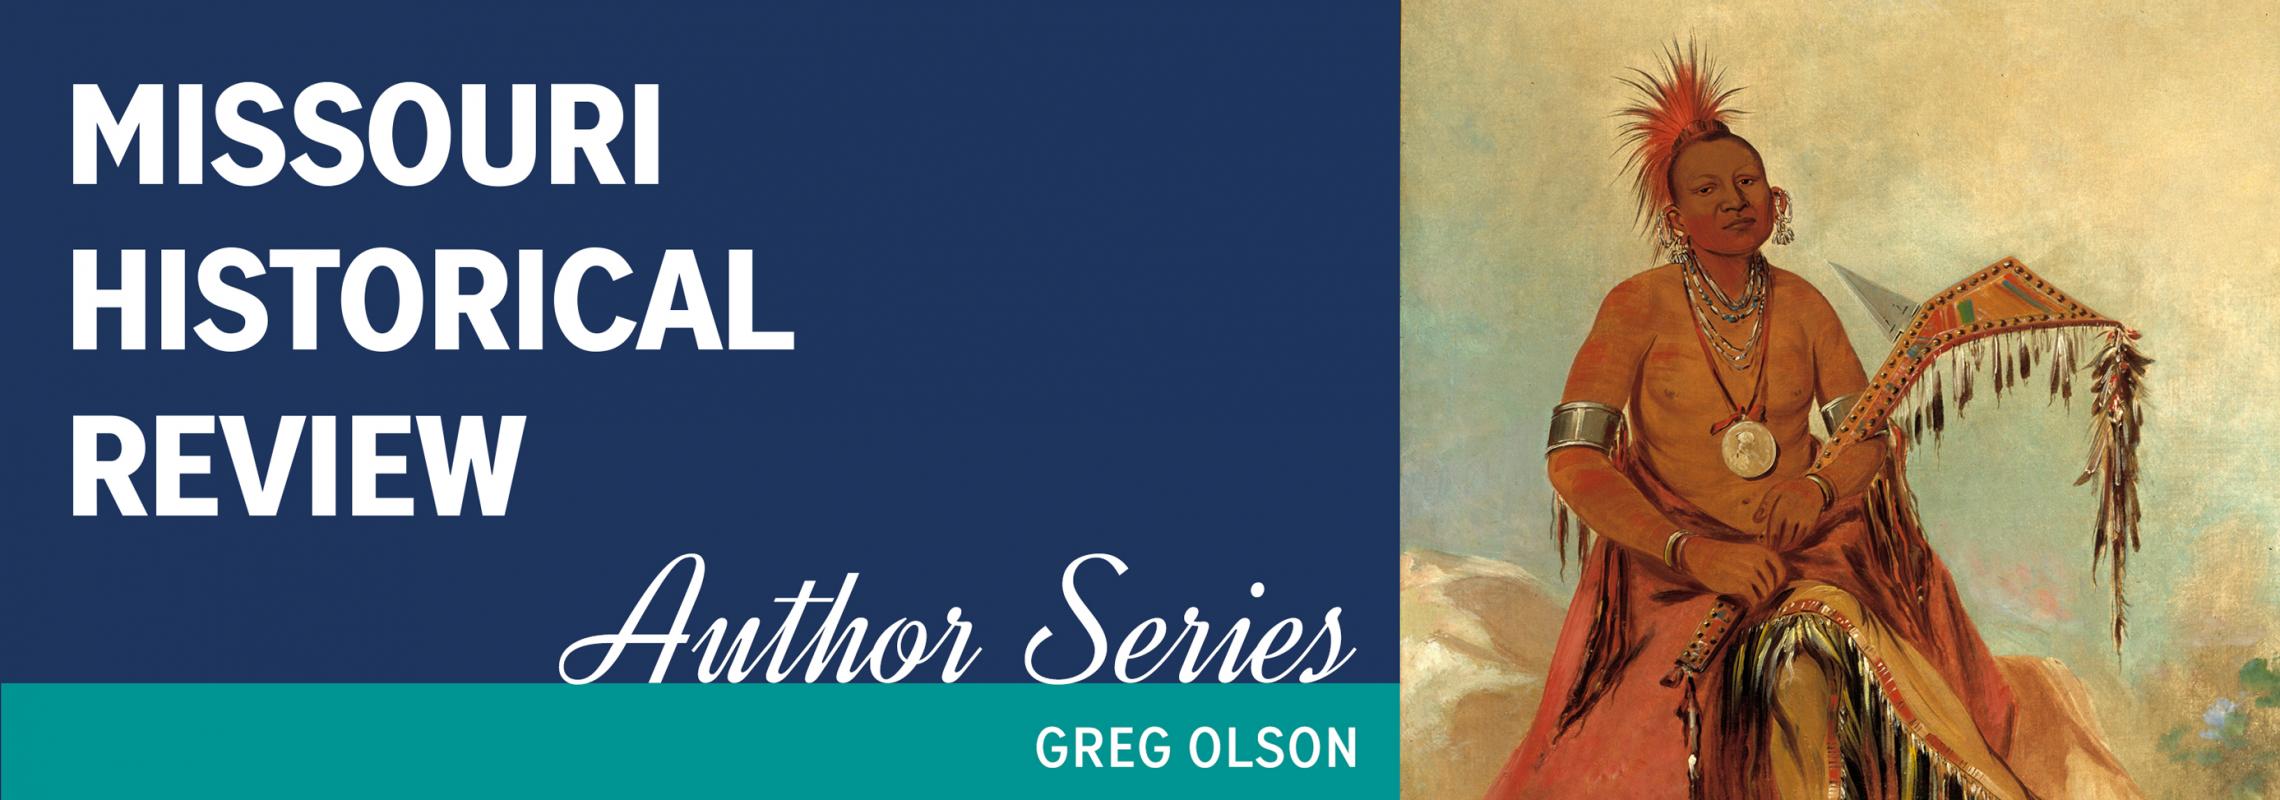 Missouri Historical Review Author Series Greg Olson with painting of Head Chief White Cloud at right